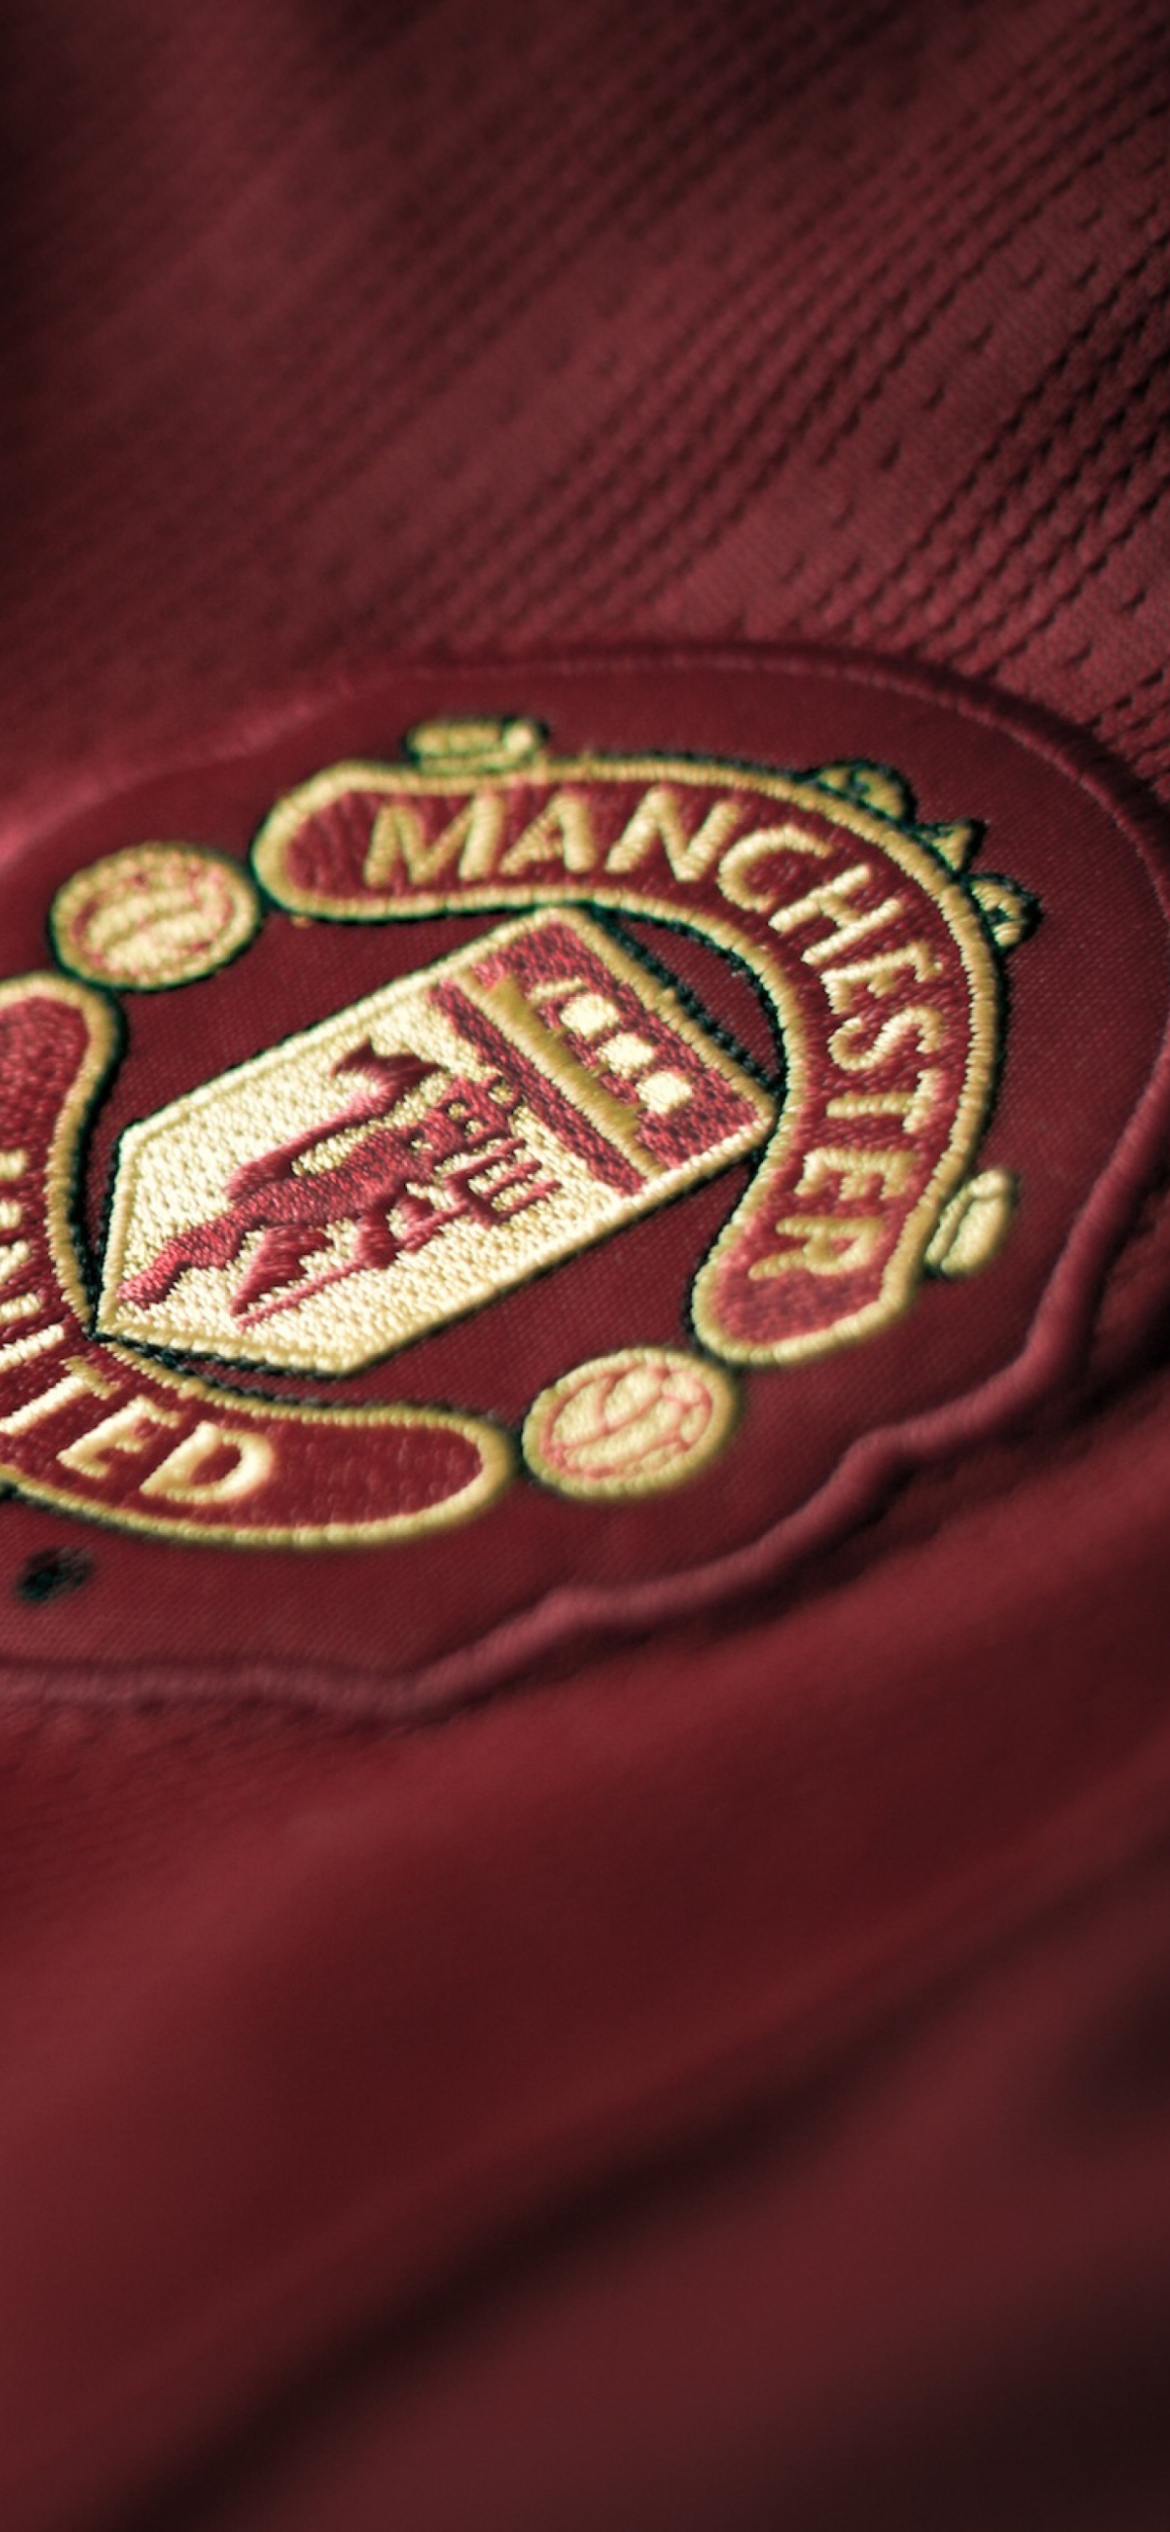 Manchester United Wallpaper for iPhone 11